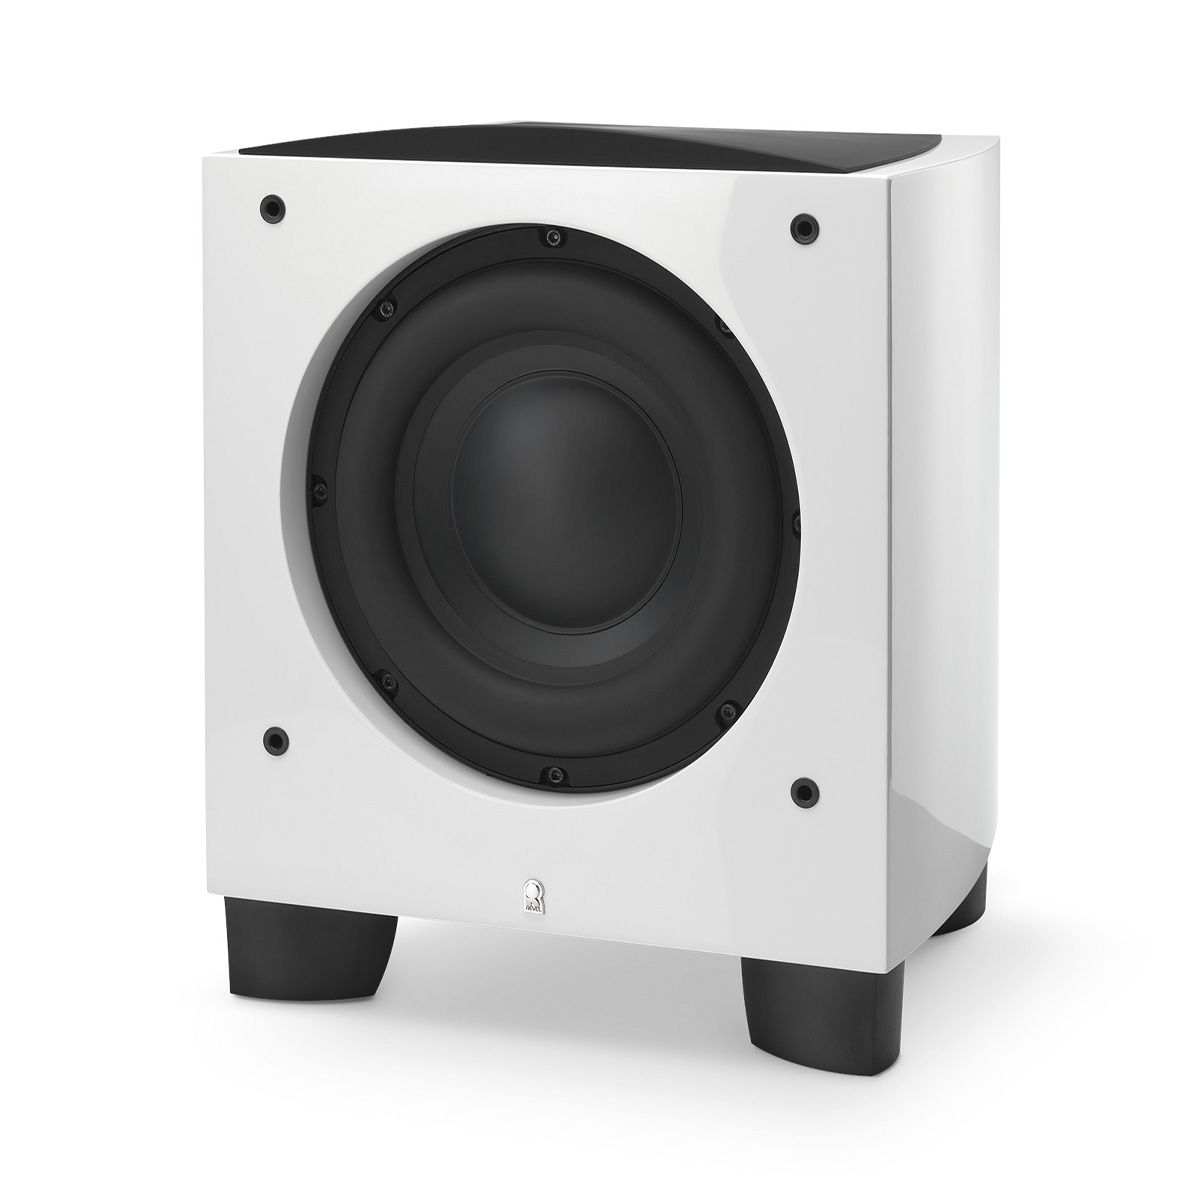 Revel B110v2 10” 1000W Powered Subwoofer - single white without grille - angled front view